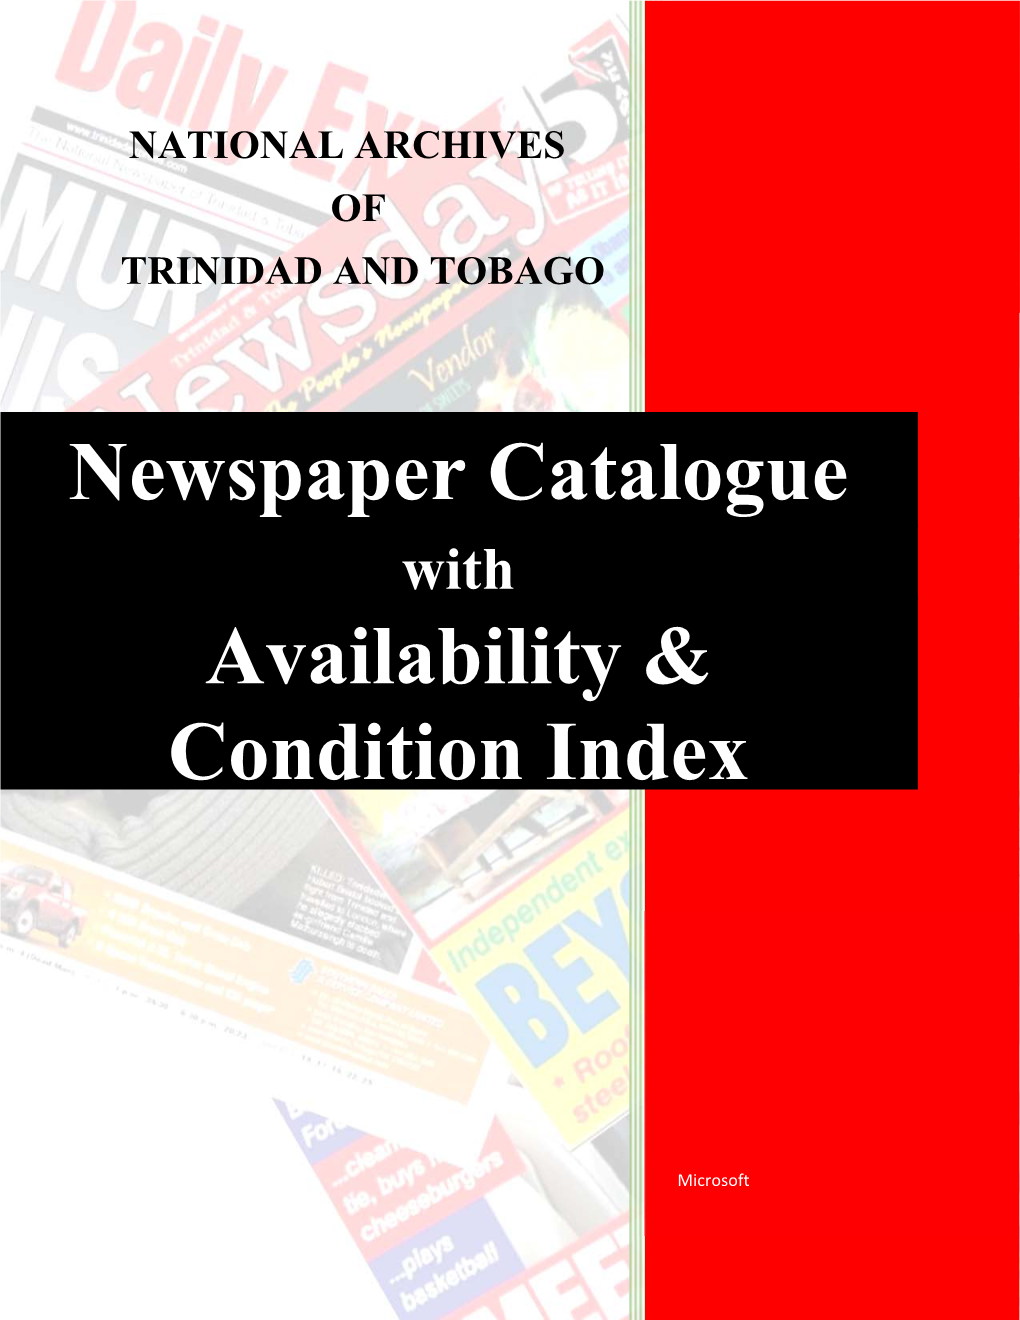 Newspaper Catalogue Availability & Condition Index